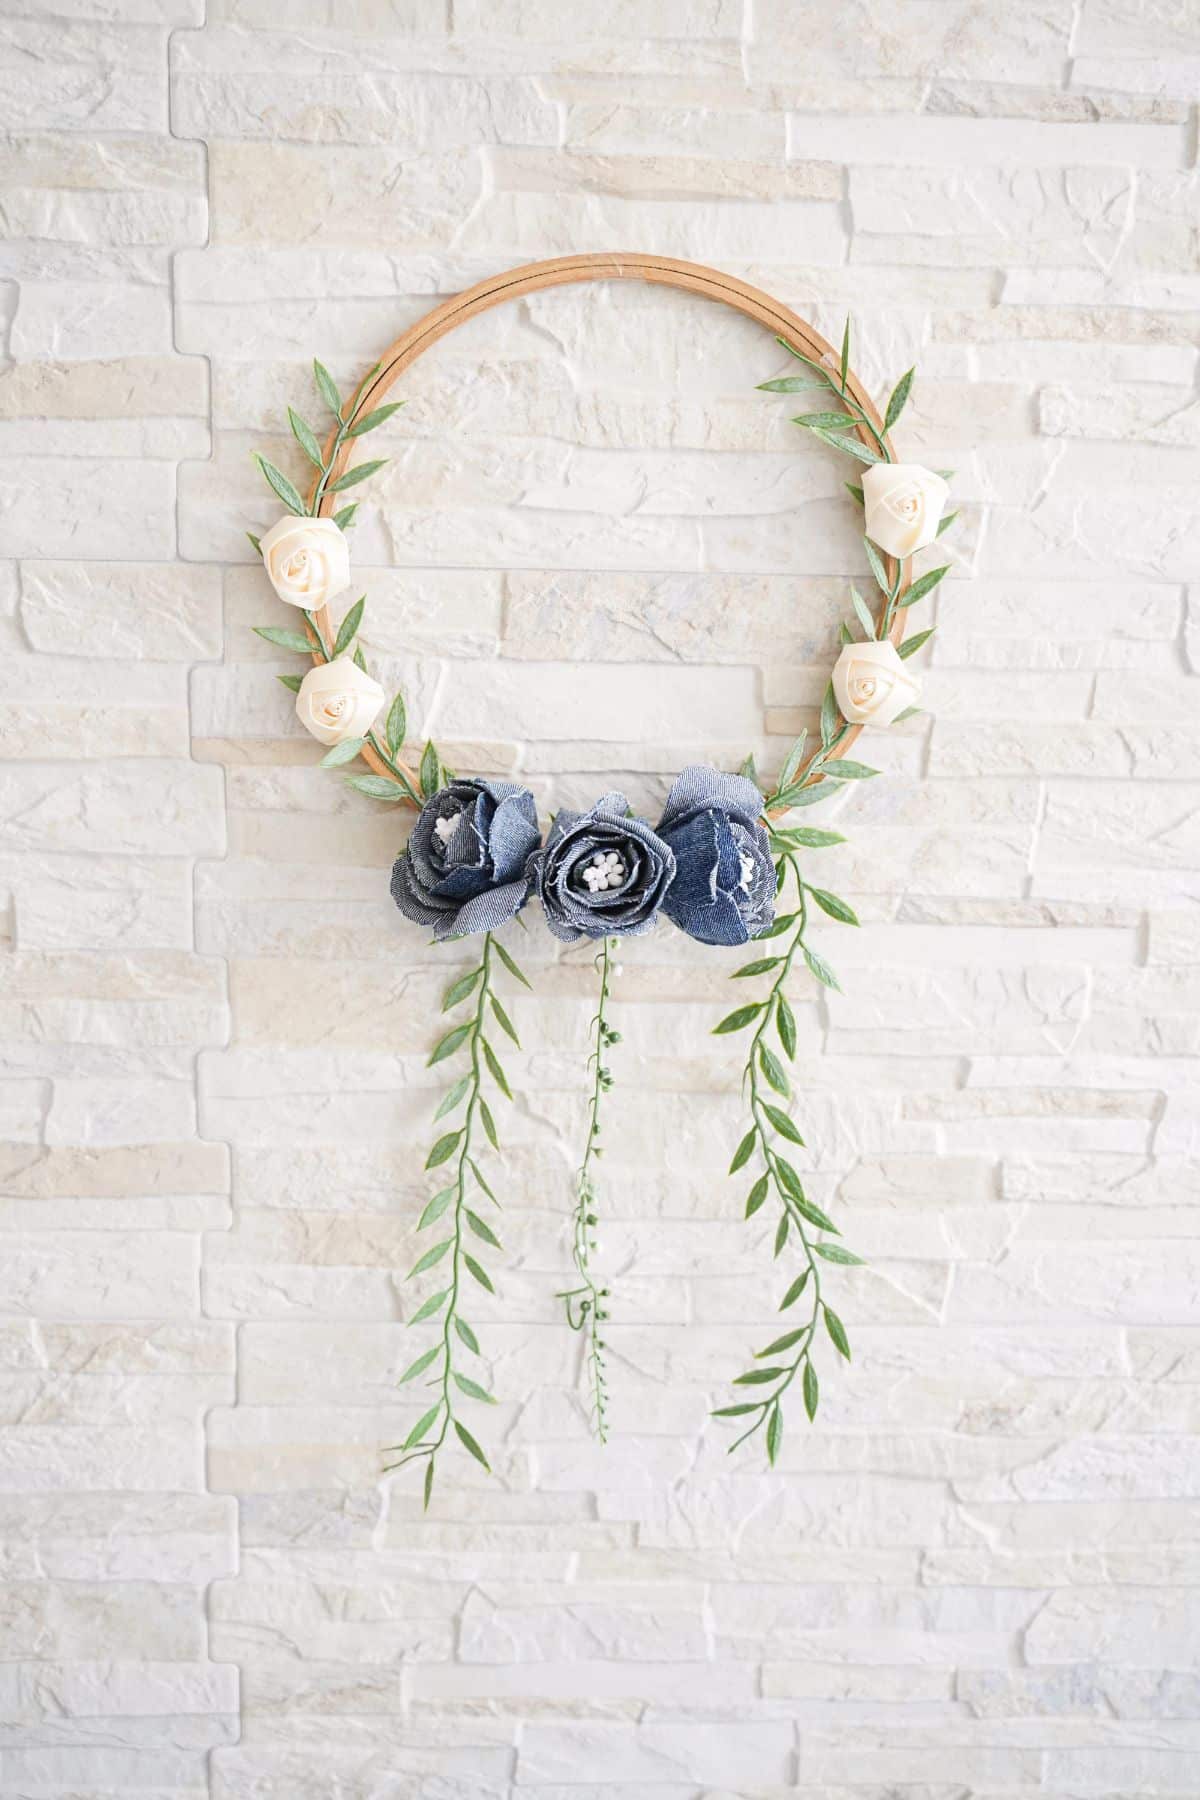 embroidery hoop wreath hanging on white brick wall